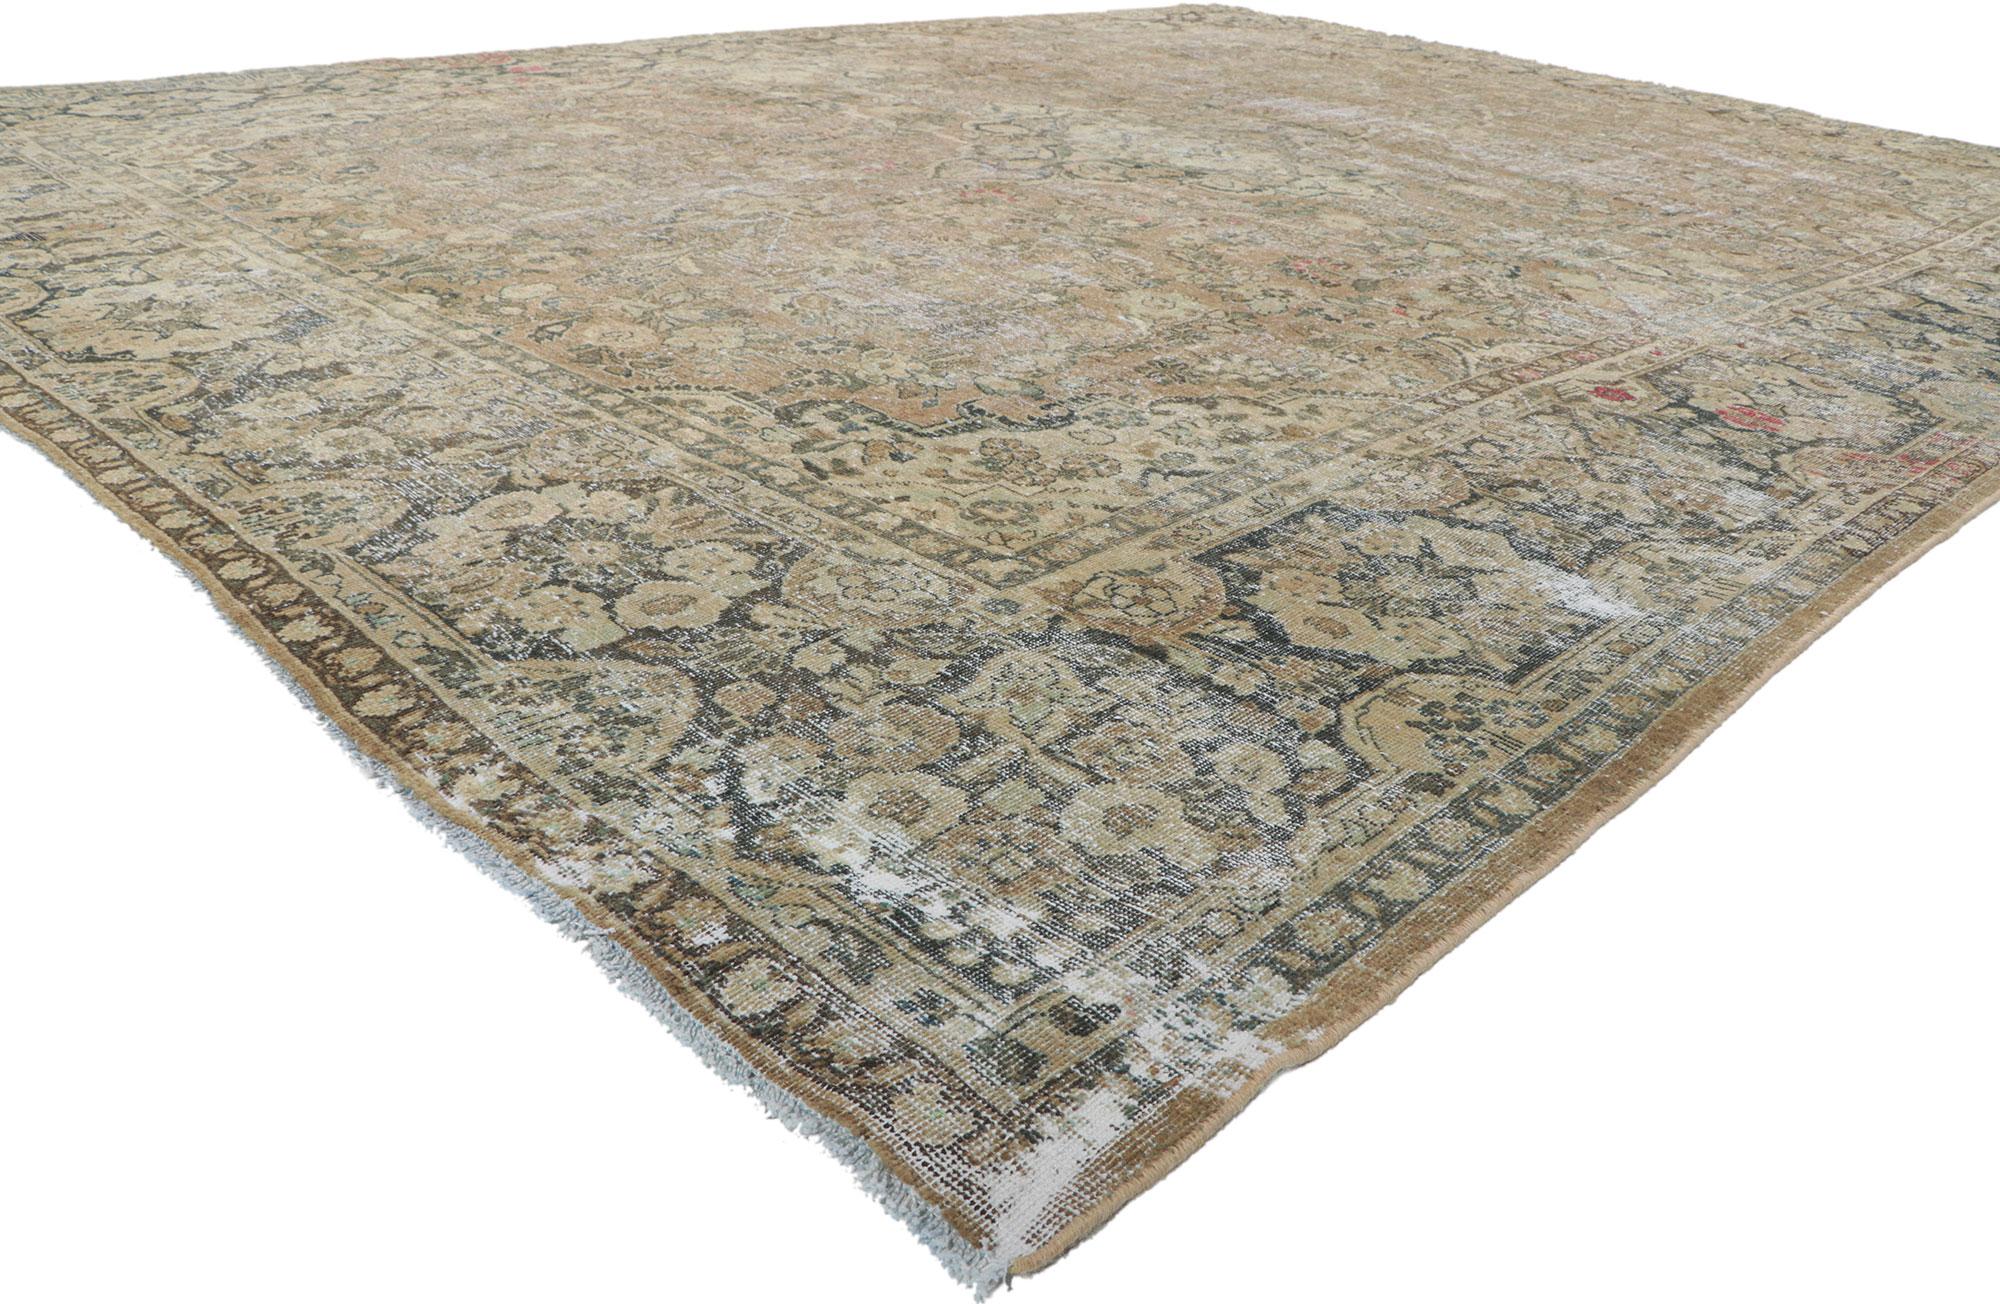 60993 antique Persian mahal rug, 10'04 x 13'08.
Emanating rustic sensibility and rugged beauty, this hand knotted wool antique Persian Mahal rug creates an inimitable warmth and calming ambiance. The timeless style and earthy colorway woven into